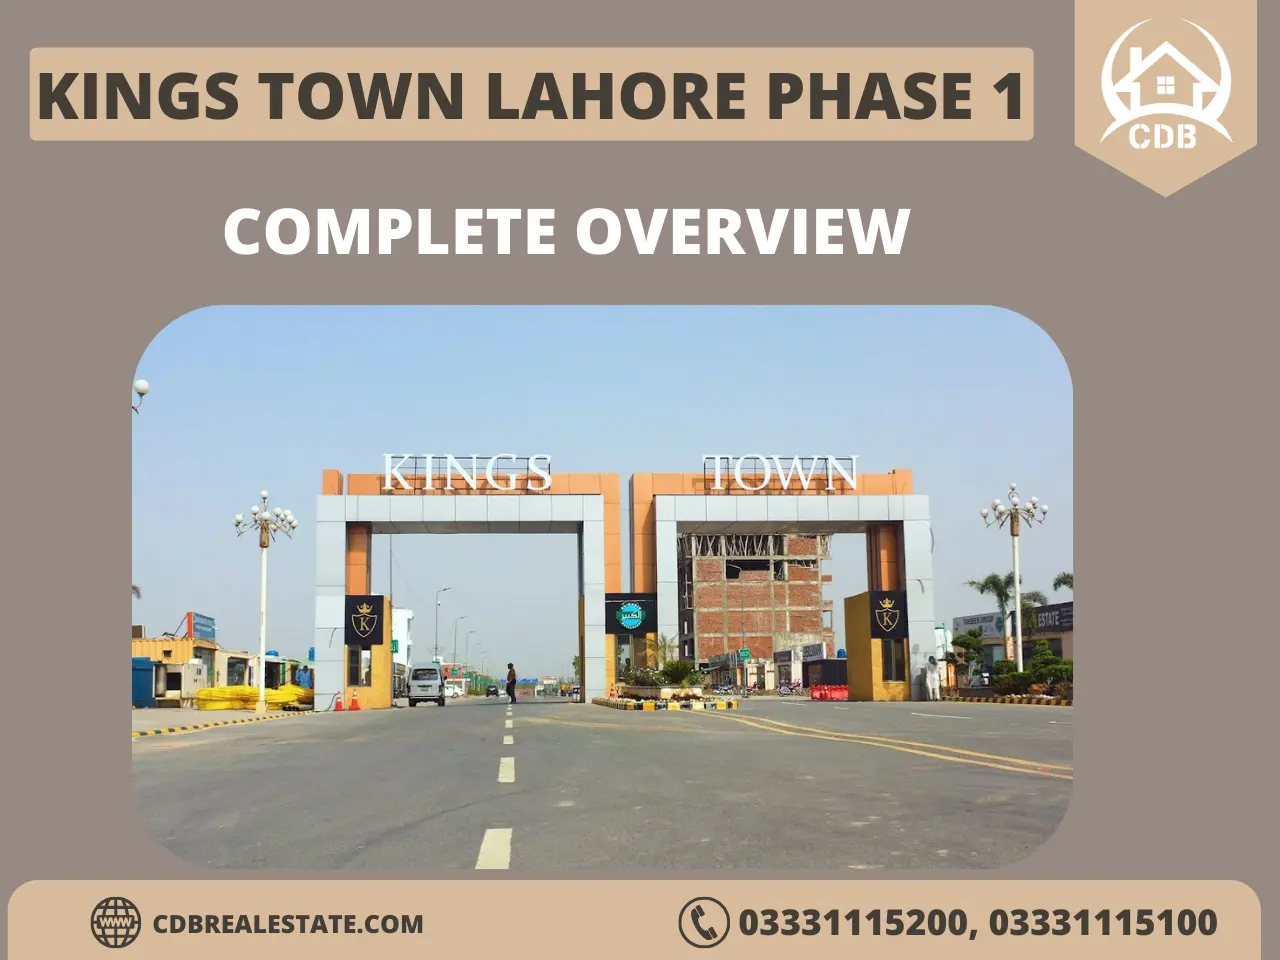 Kings Town Lahore Phase 1